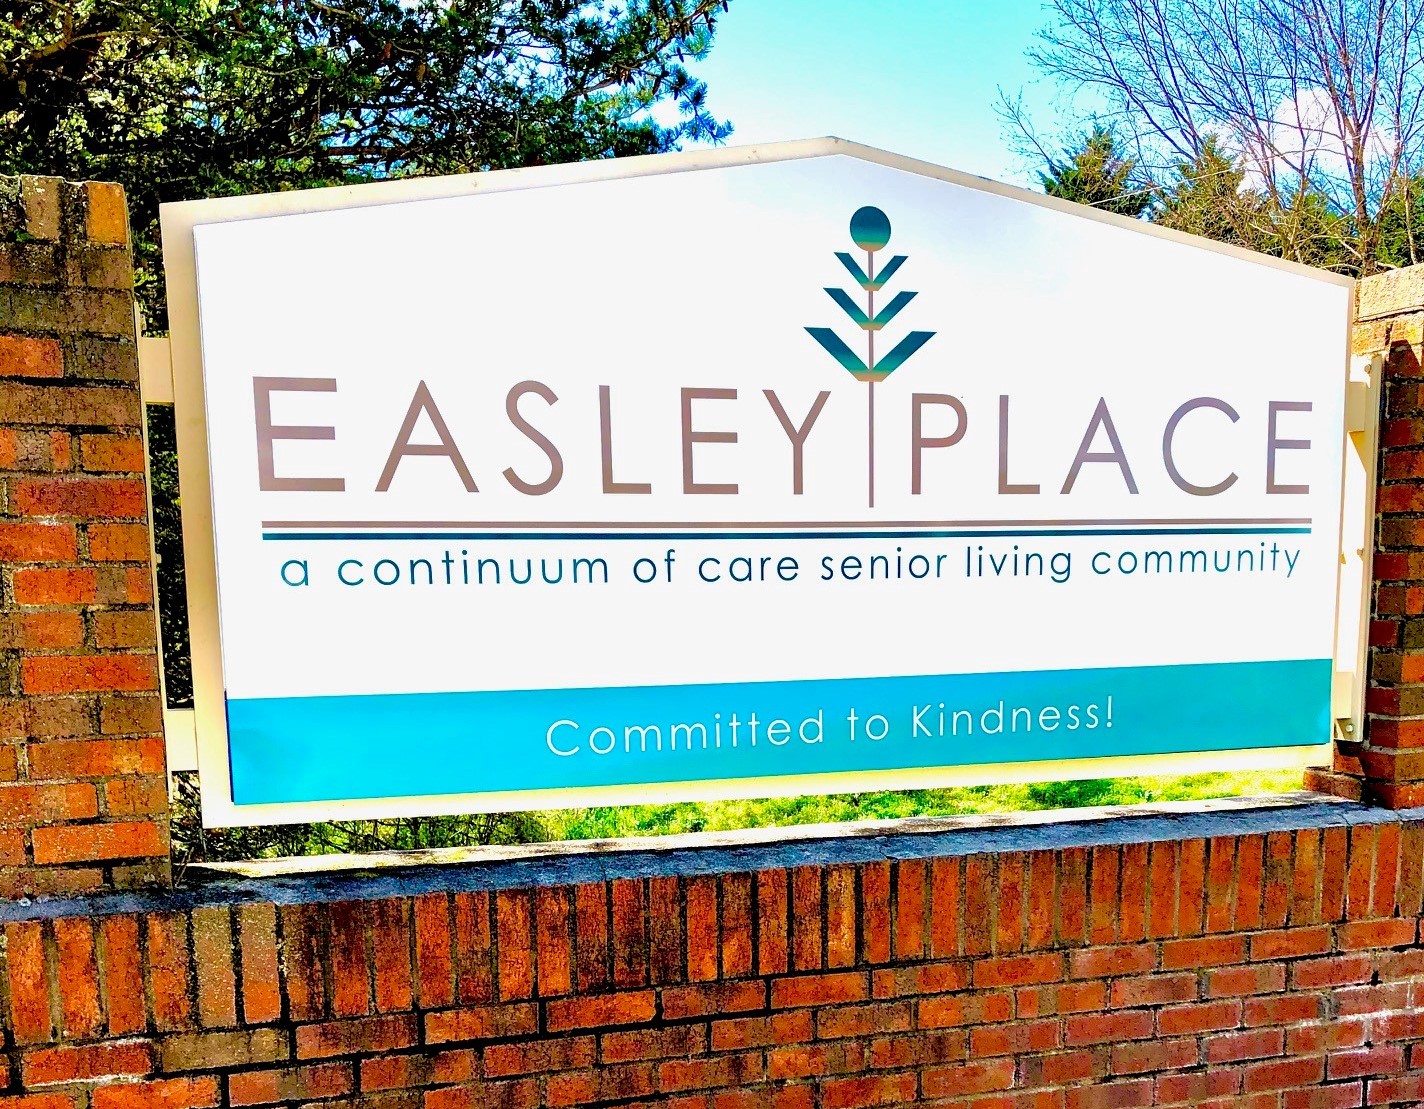 Easley Place image